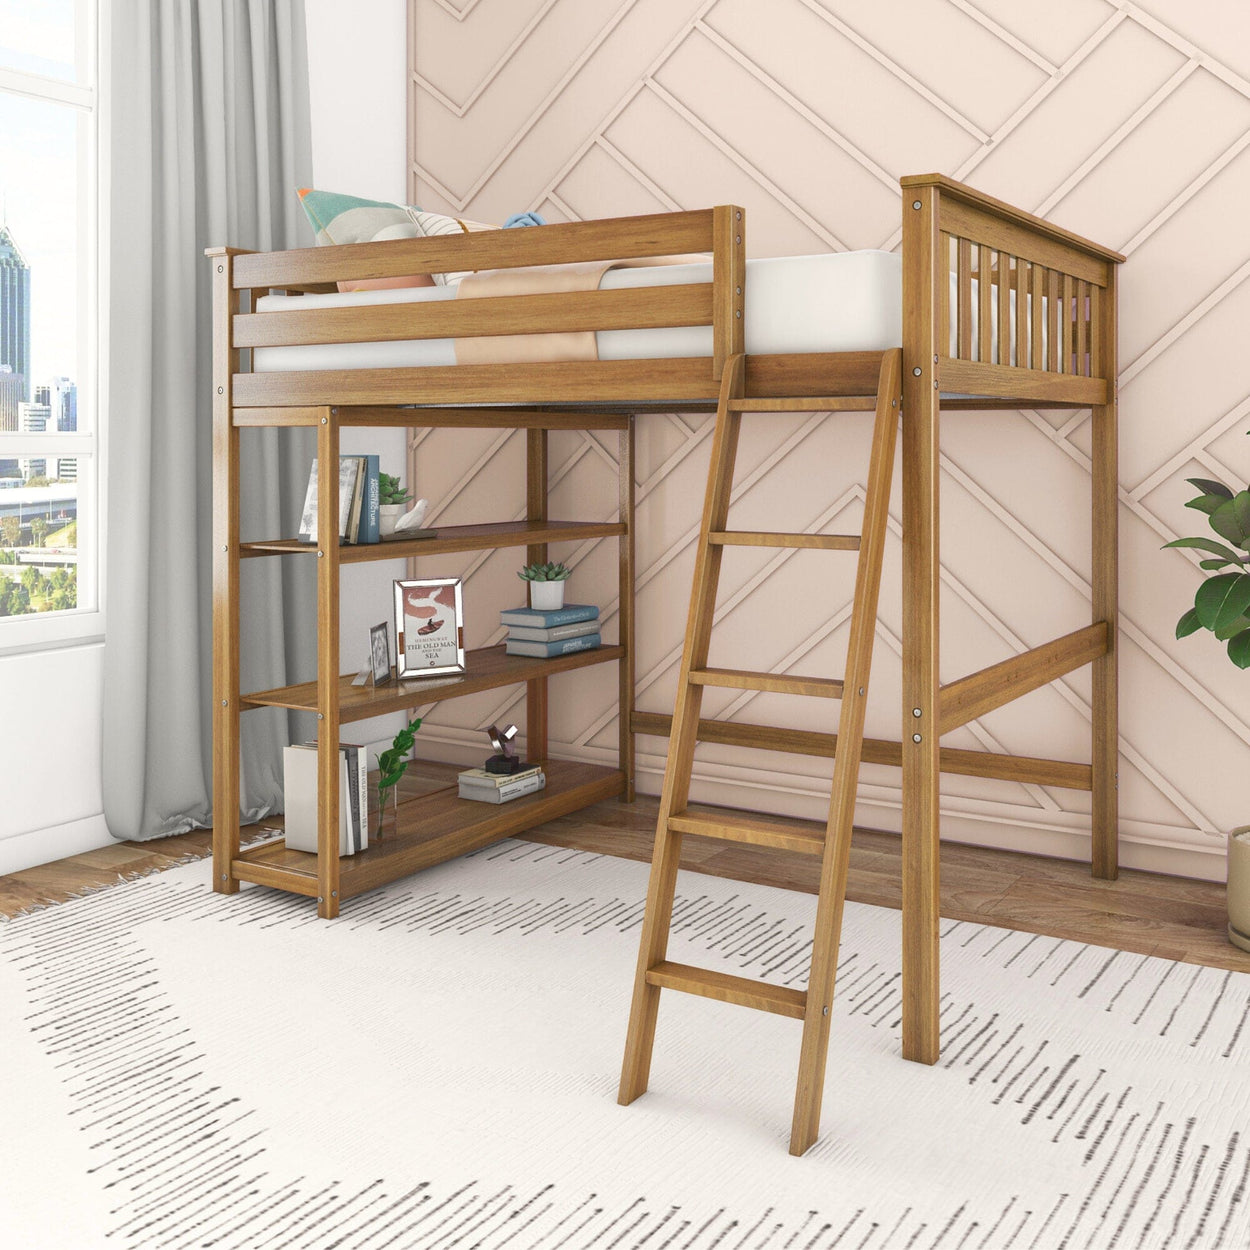 185247-007 : Storage & Study Loft Beds Full-Size High Loft Bed with Bookcase, Pecan